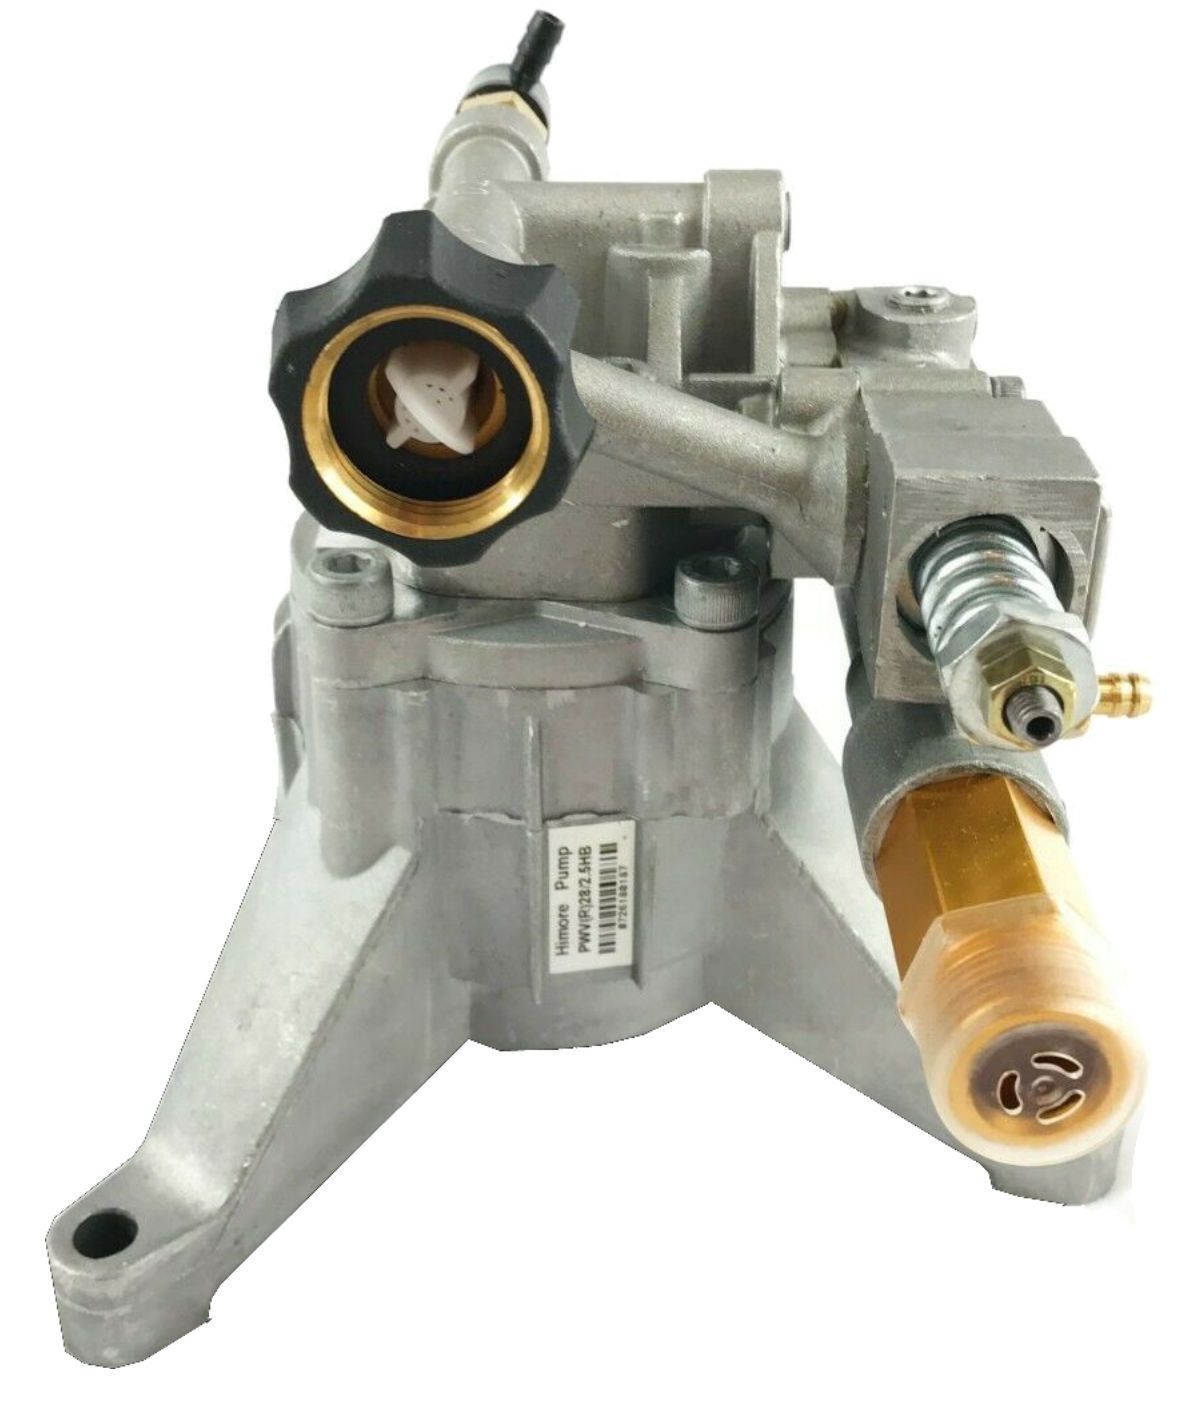 2700 PSI PRESSURE WASHER WATER PUMP Campbell Hausfeld PW2200V1LE - AE-Power